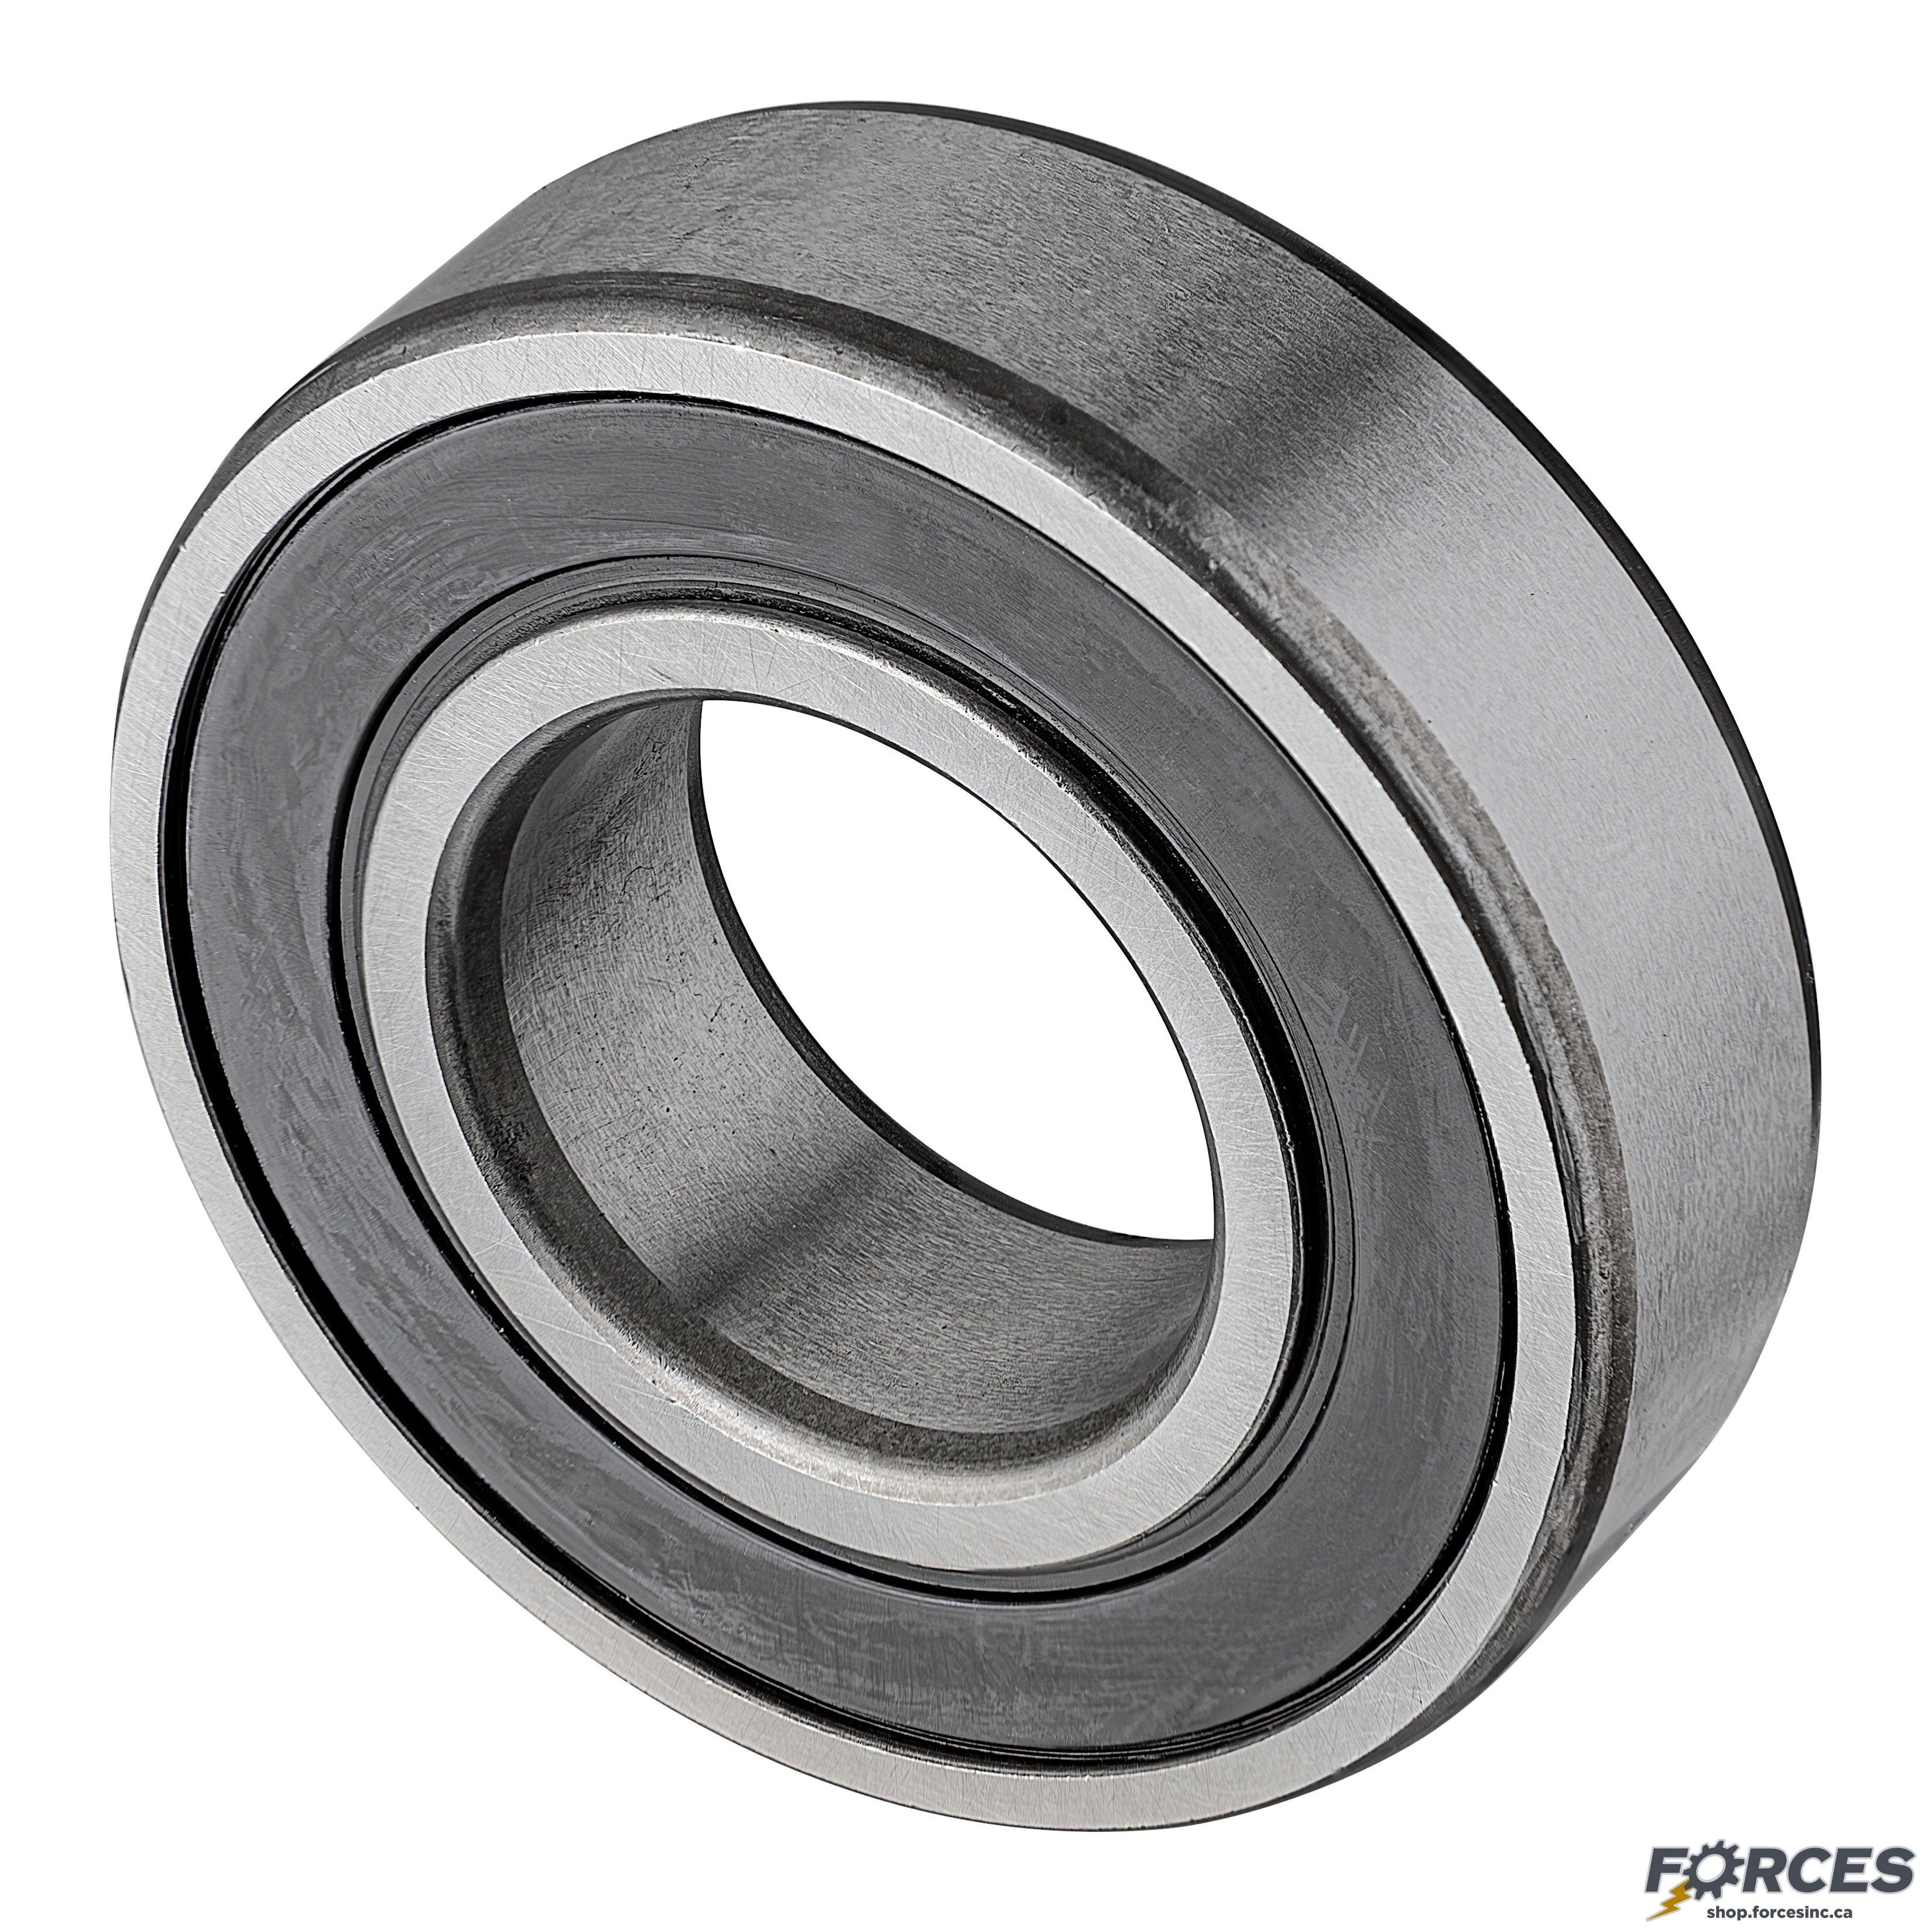 6206-2RS | Ball Bearings Metric 30mmx62mmx16mm Seal 2RS - Forces Inc